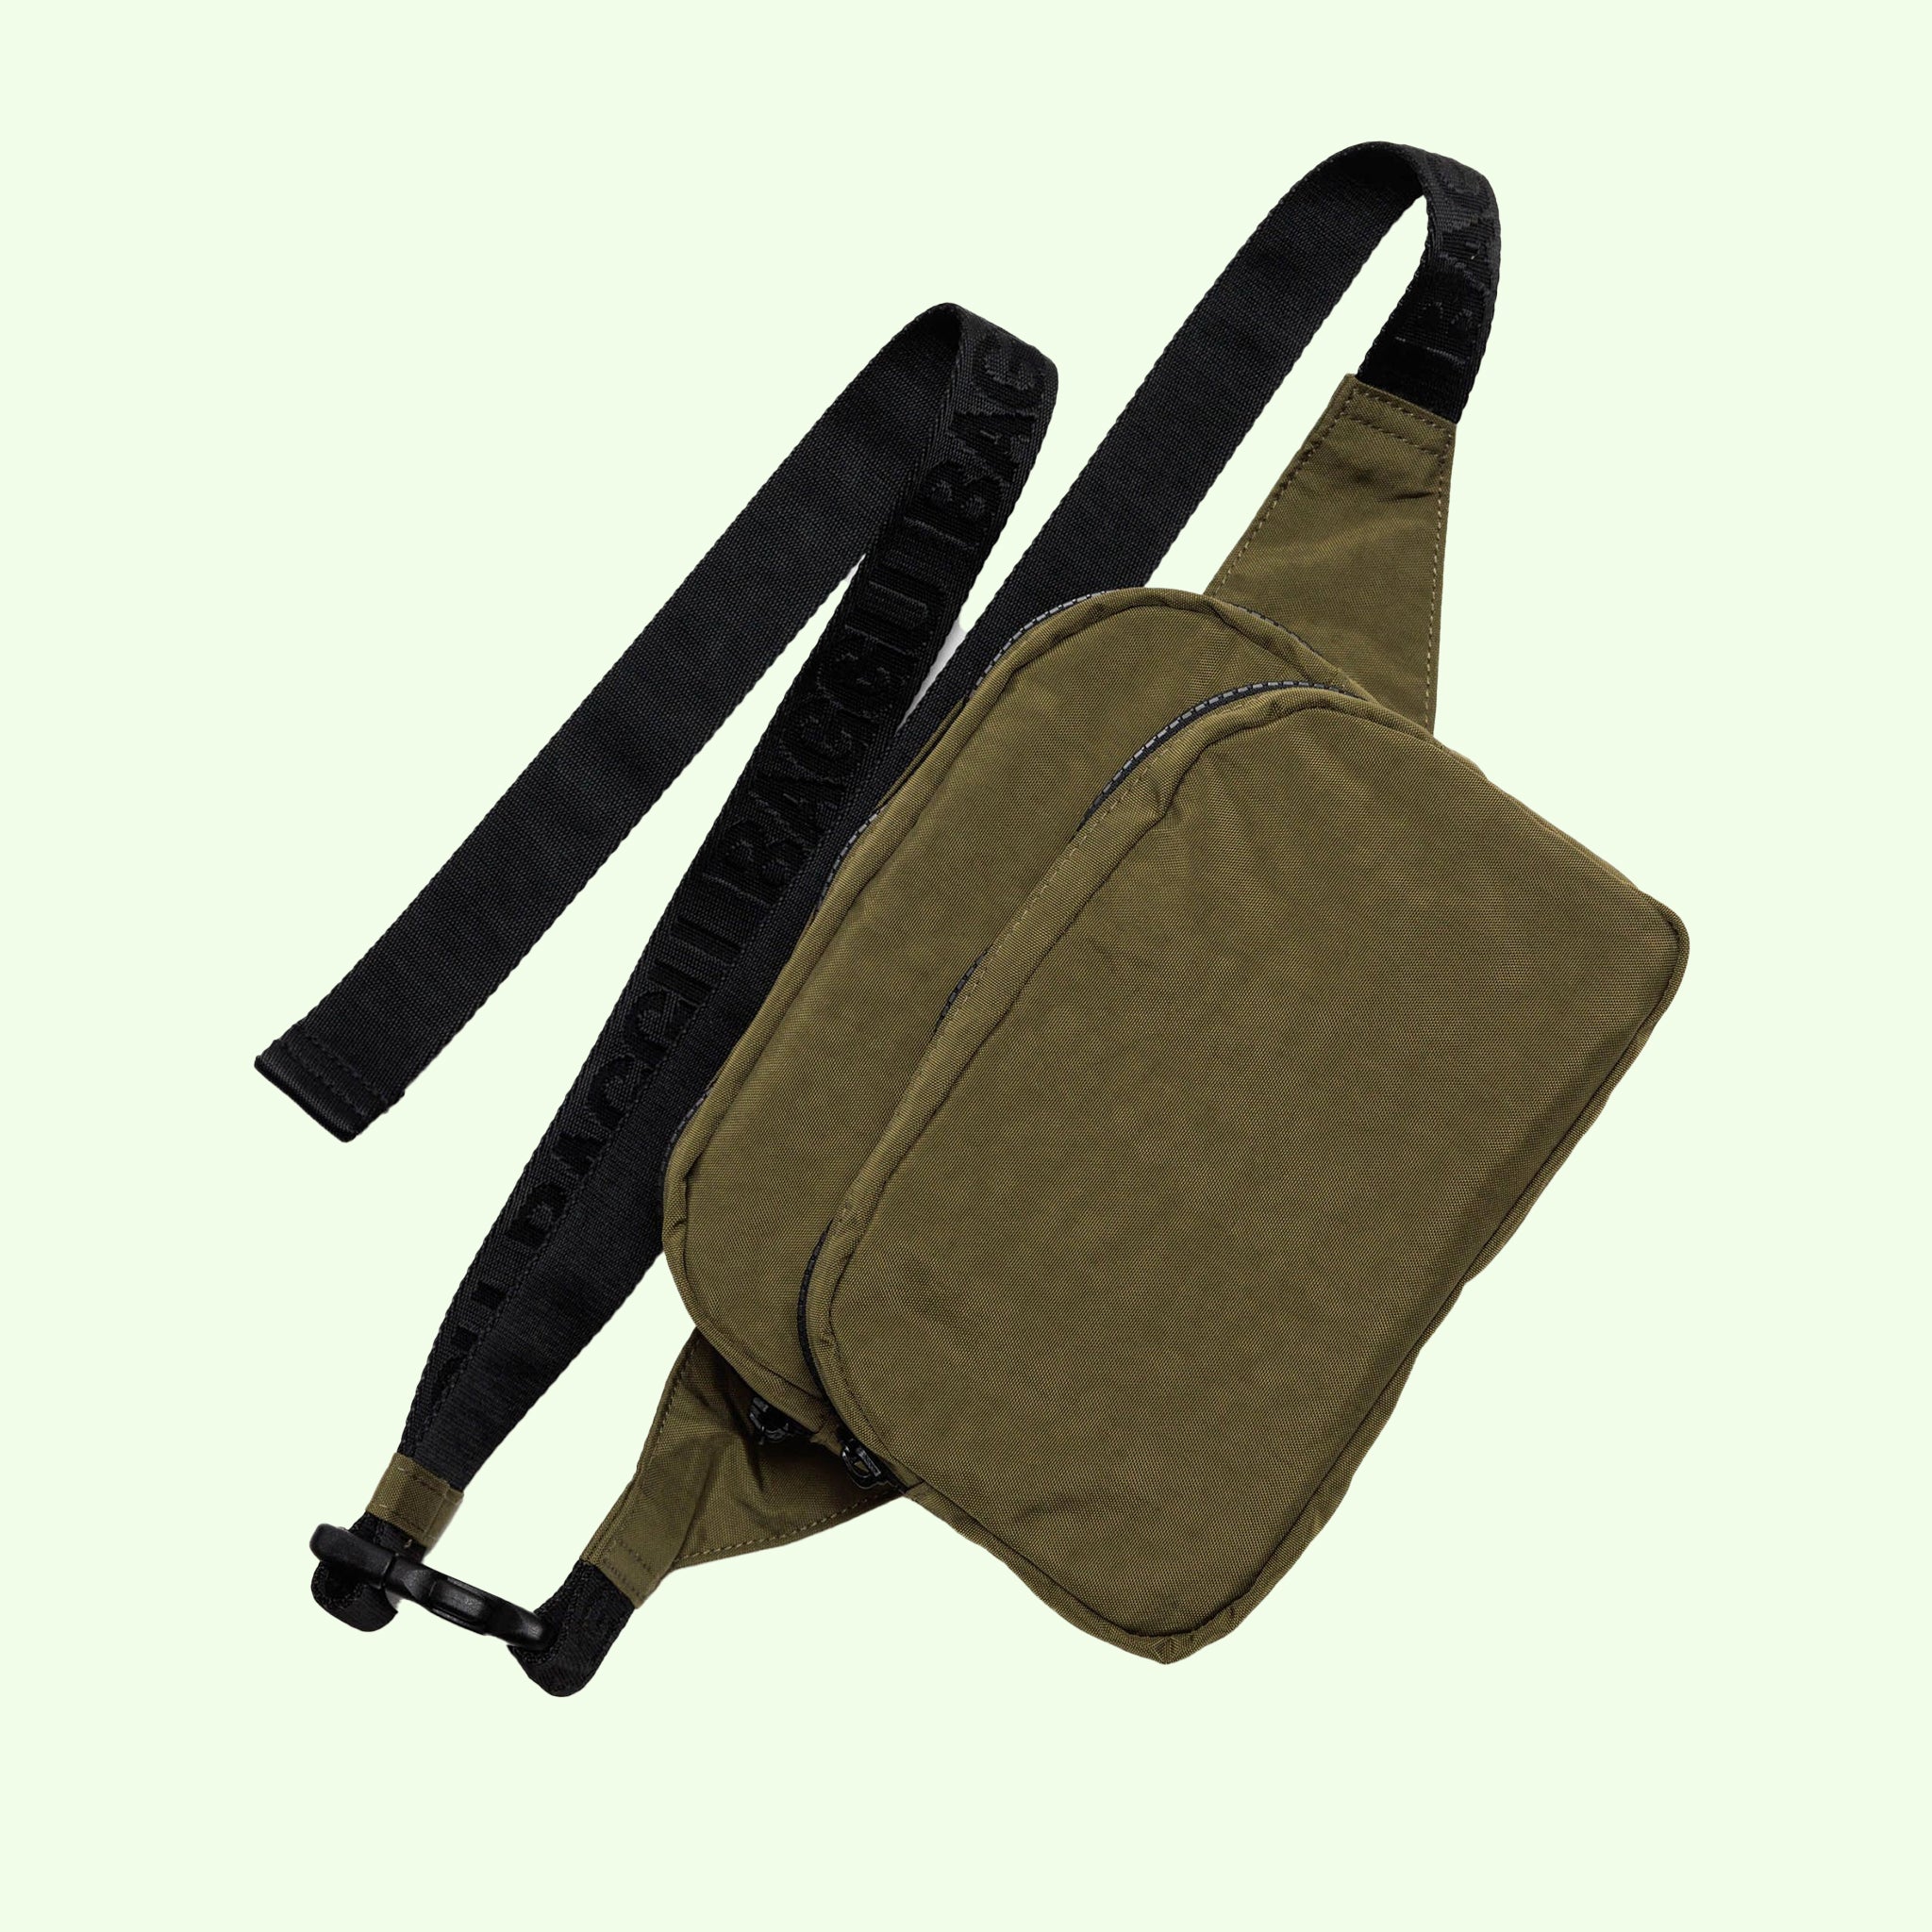 A dark green nylon fanny pack with two compartments and a black adjustable strap. 